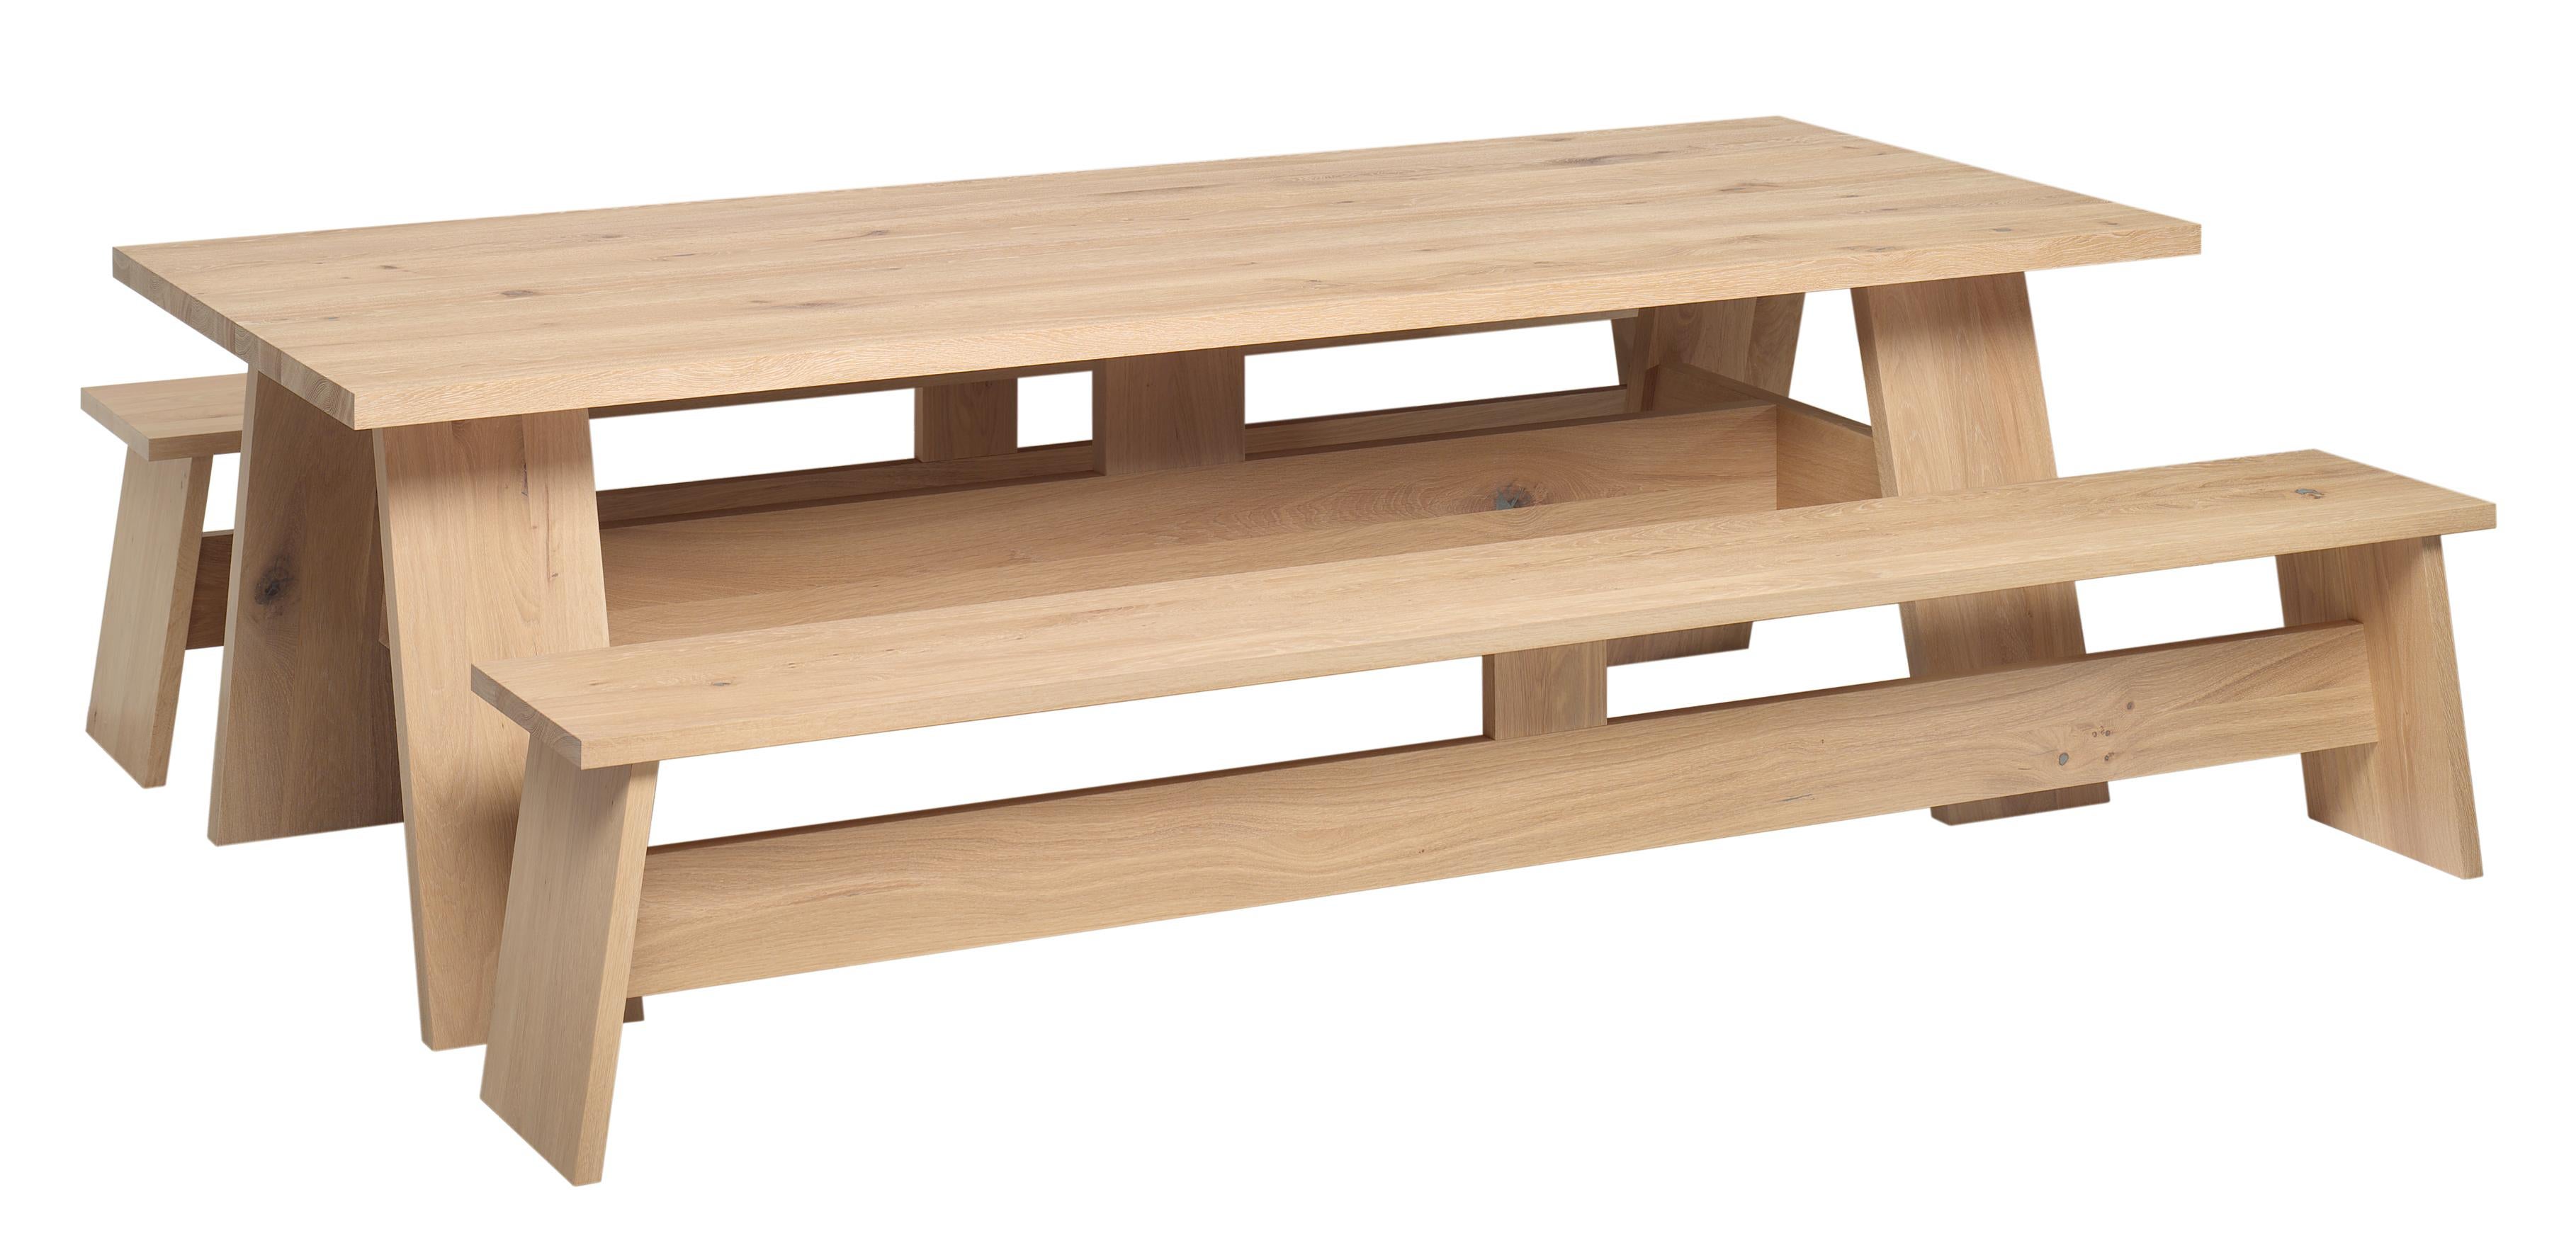 e15 Fawley Wood Bench by David Chipperfield In New Condition For Sale In New York, NY